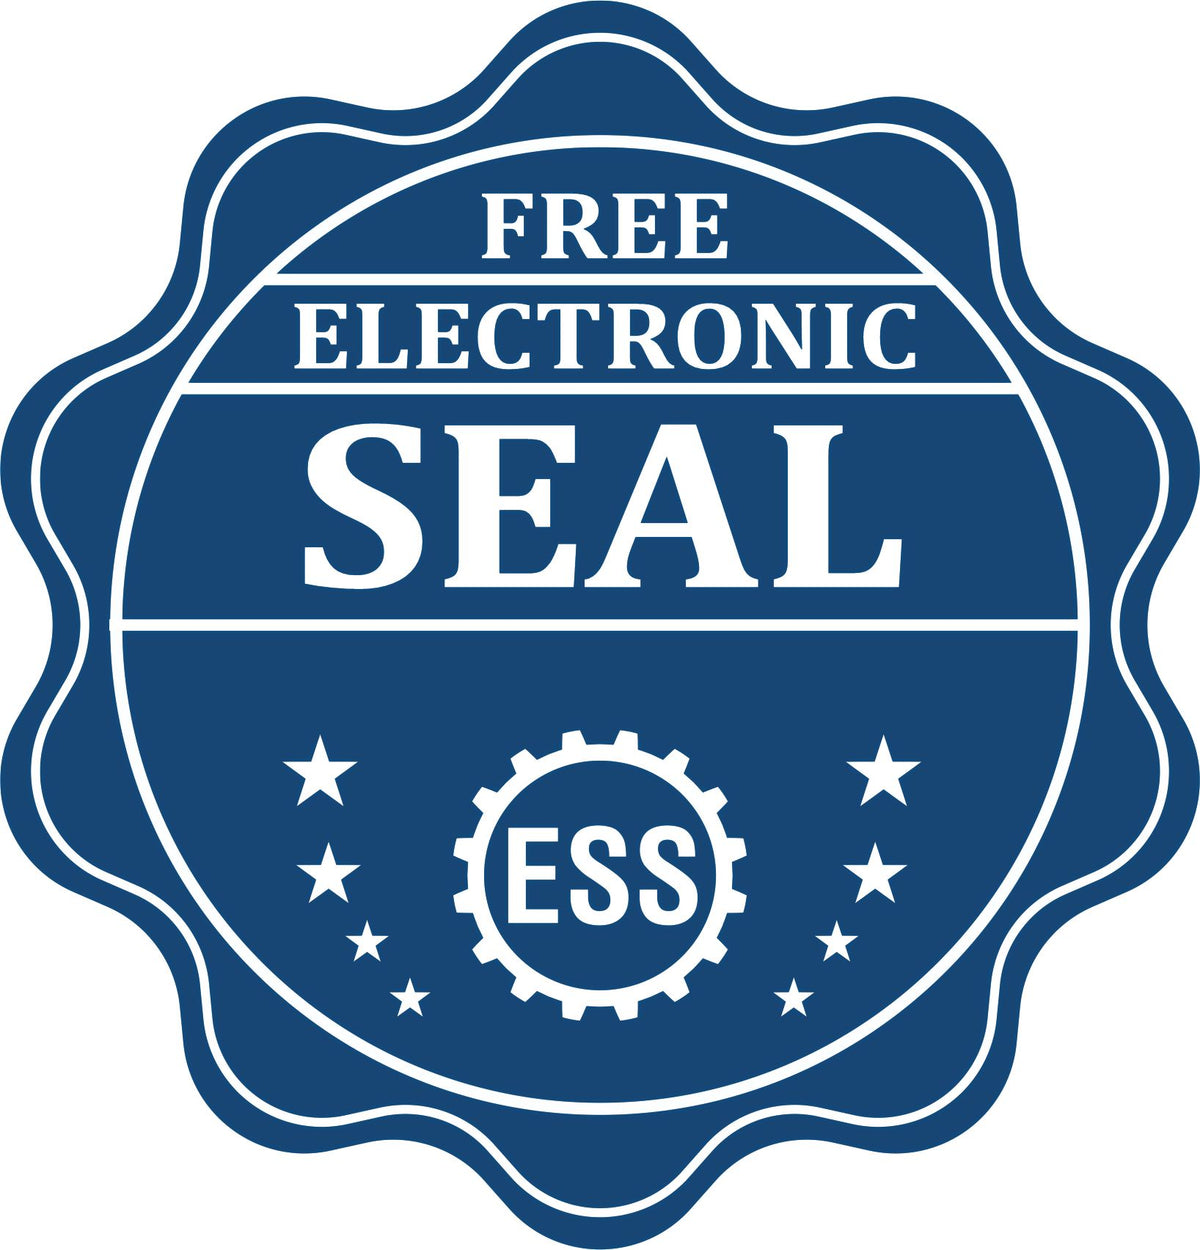 A badge showing a free electronic seal for the Slim Pre-Inked Texas Landscape Architect Seal Stamp with stars and the ESS gear on the emblem.